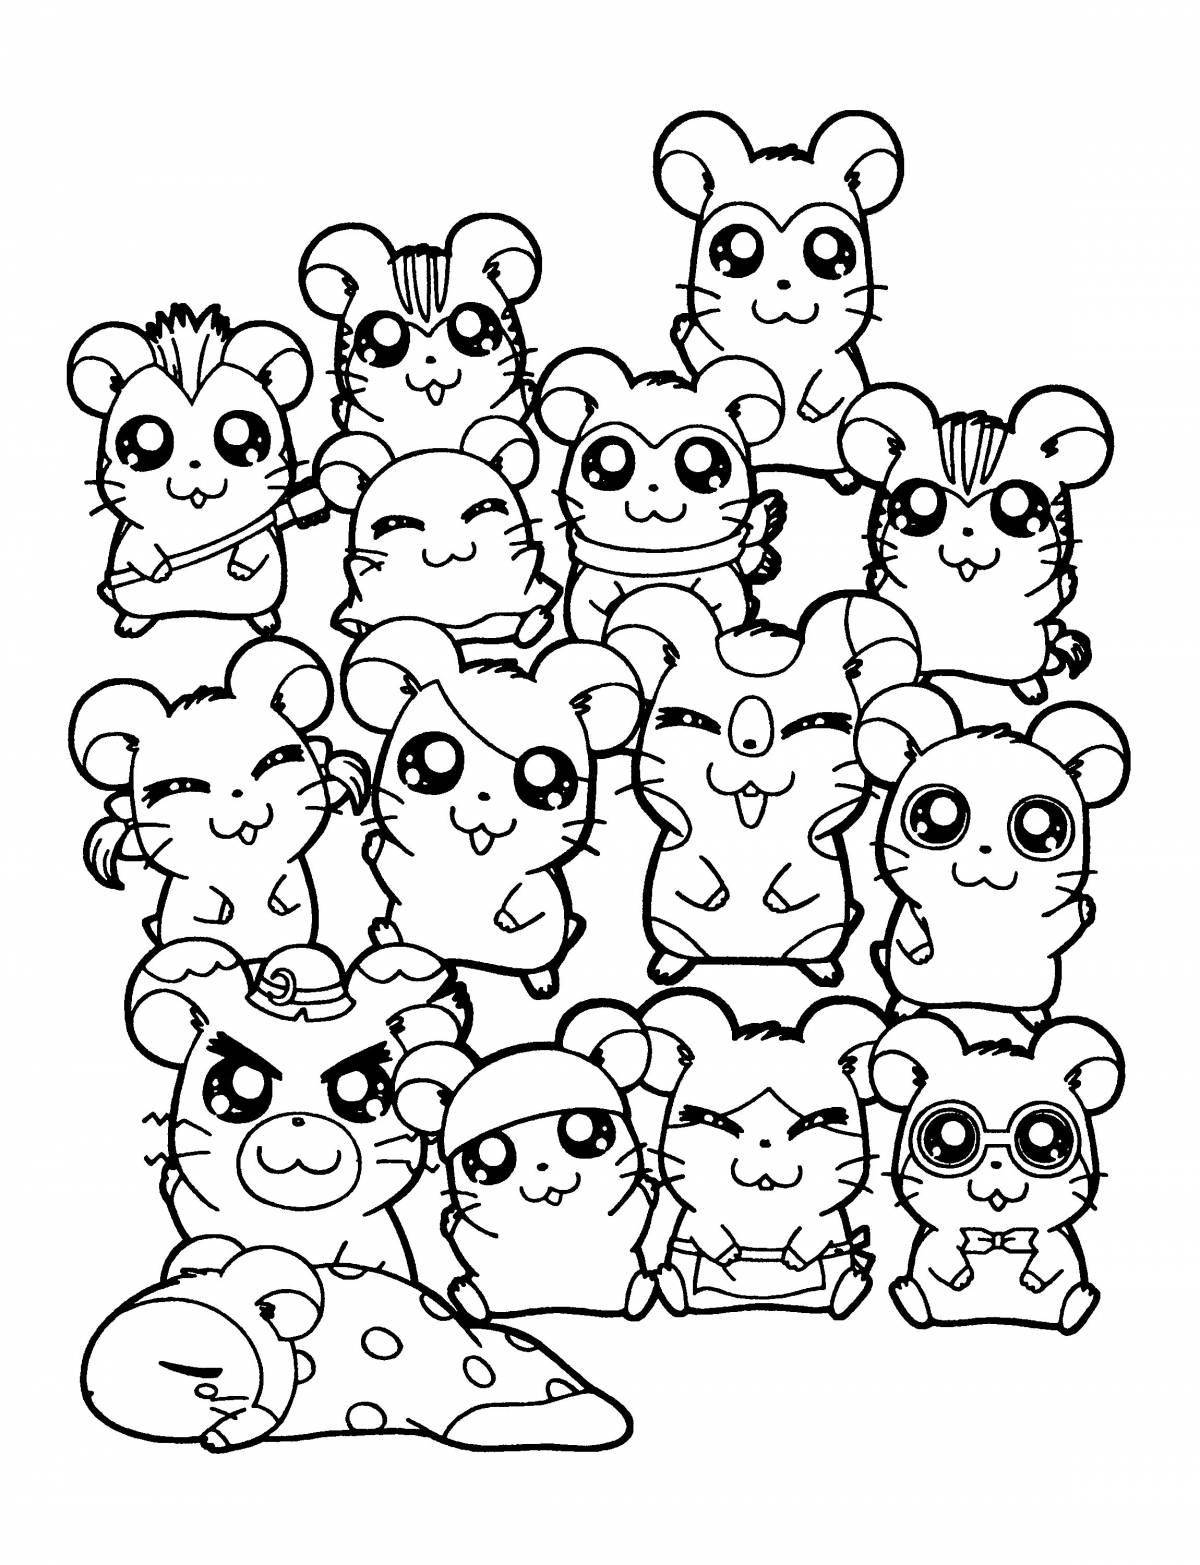 Fun coloring for cute little animals for girls